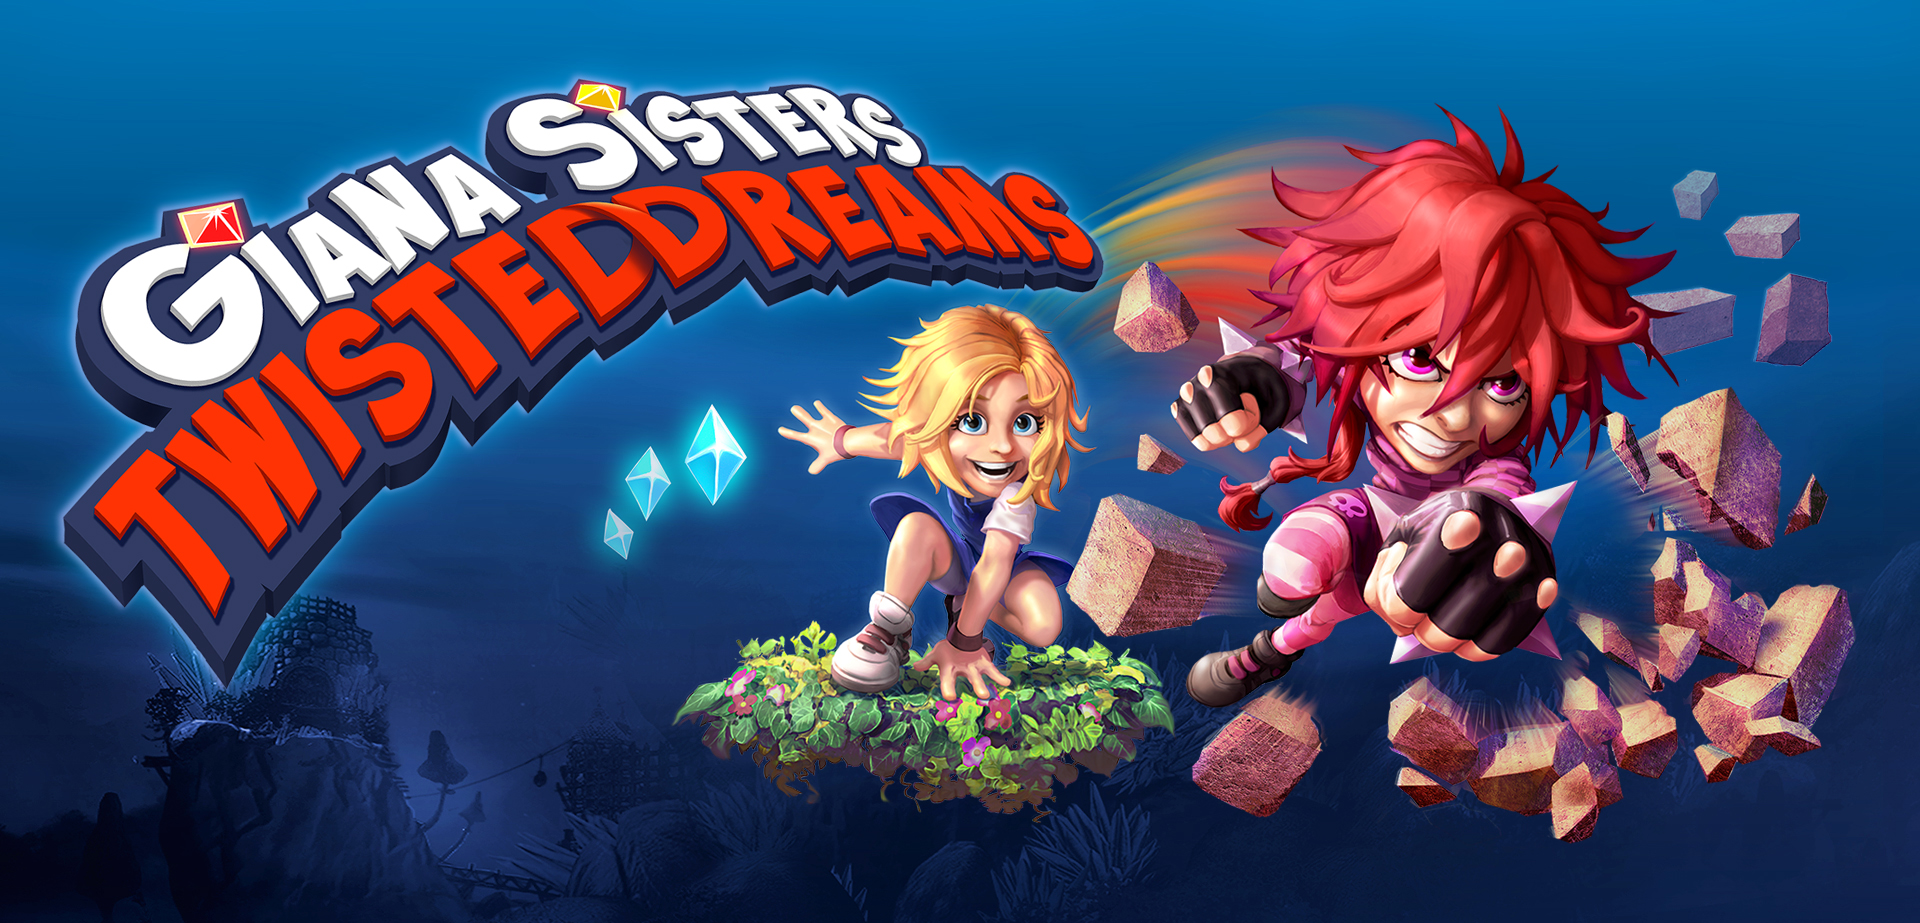 “Giana Sisters: Twisted Dreams” Heading to PS4 and Xbox One - Twisting into Reality in December